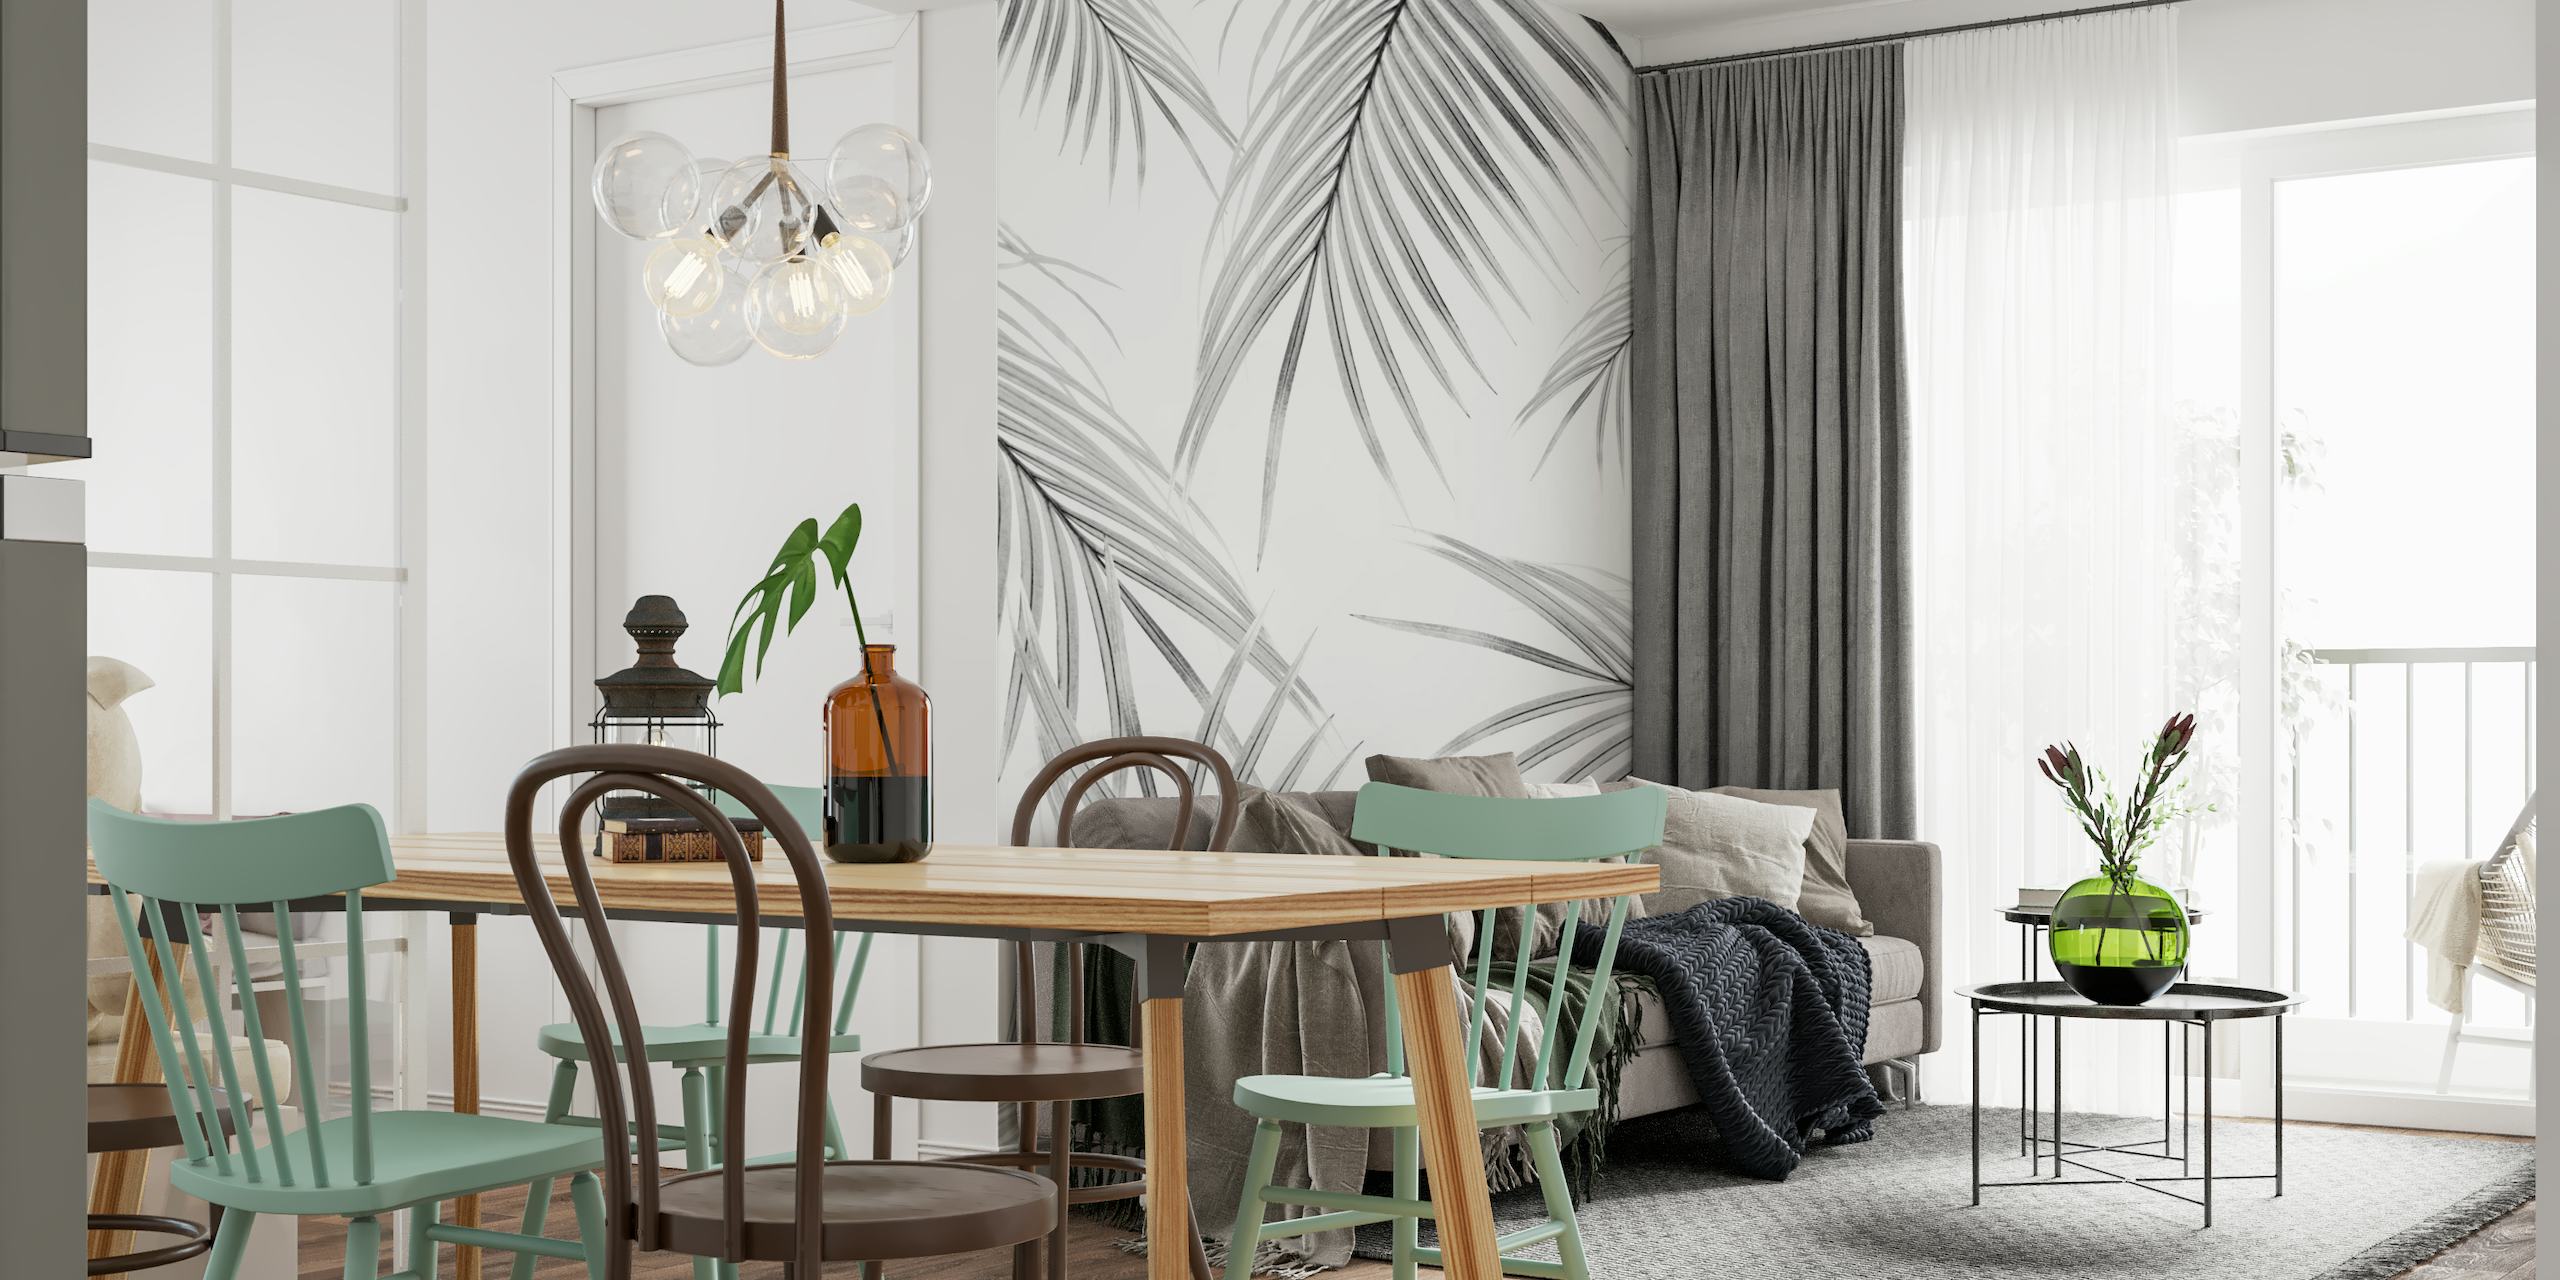 A wall mural with a design of soft gray palm leaves for a tranquil ambiance.